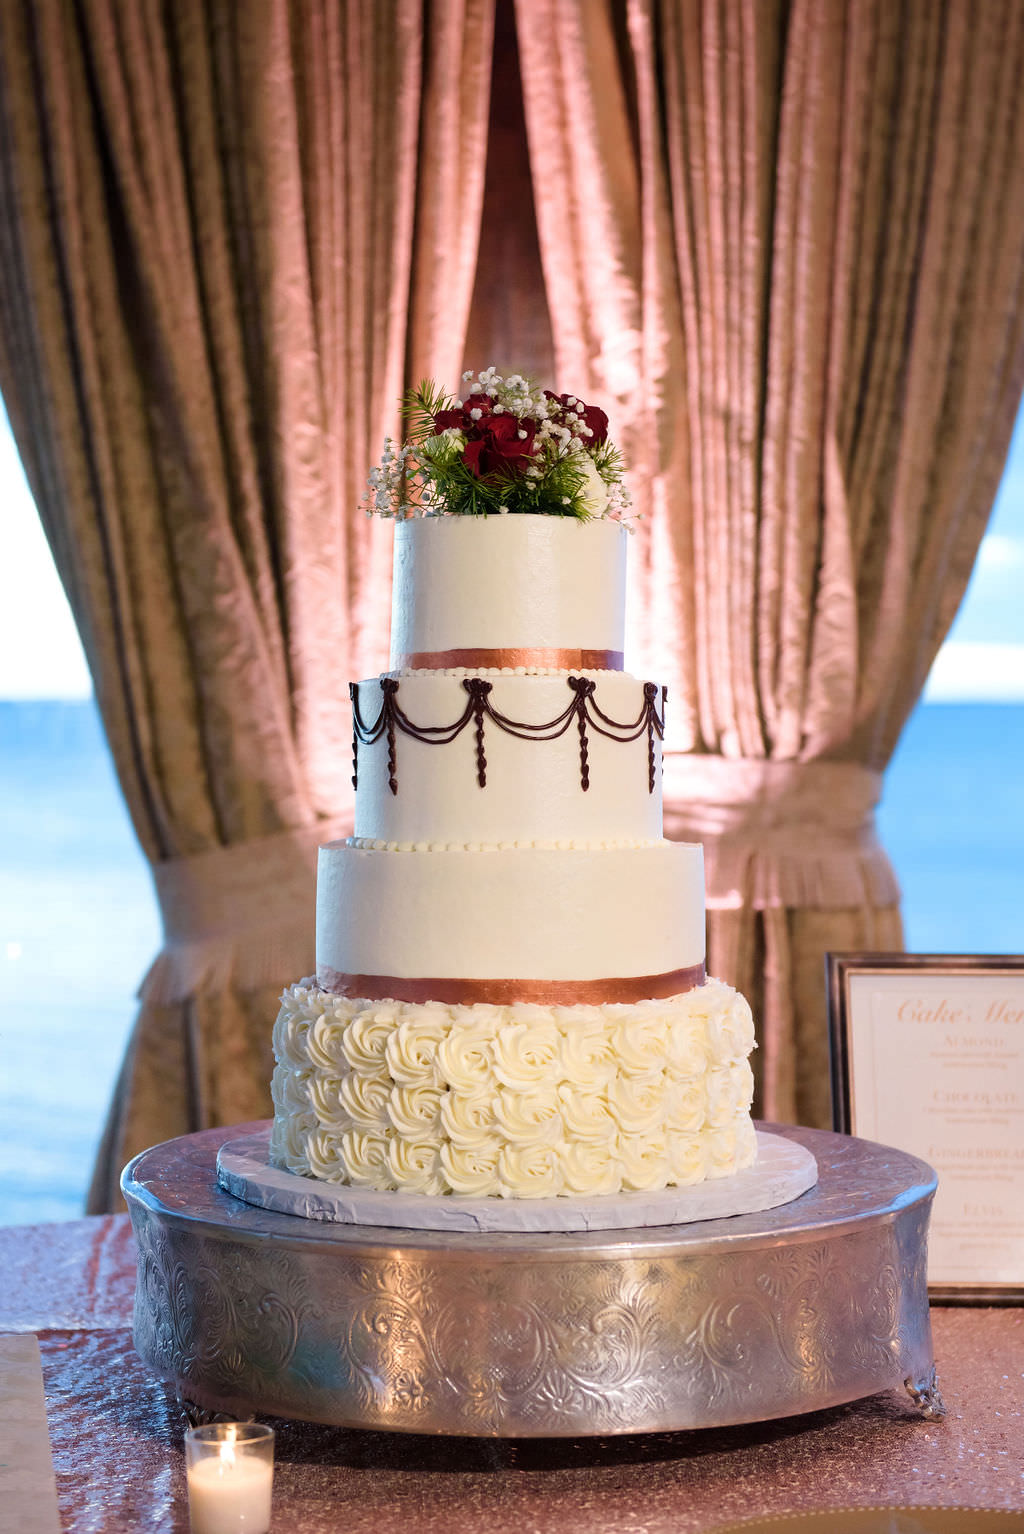 Four Tier White Wedding Cake with Rose Gold Accents and Real Flower Cake Topper on Silver Cake Stand